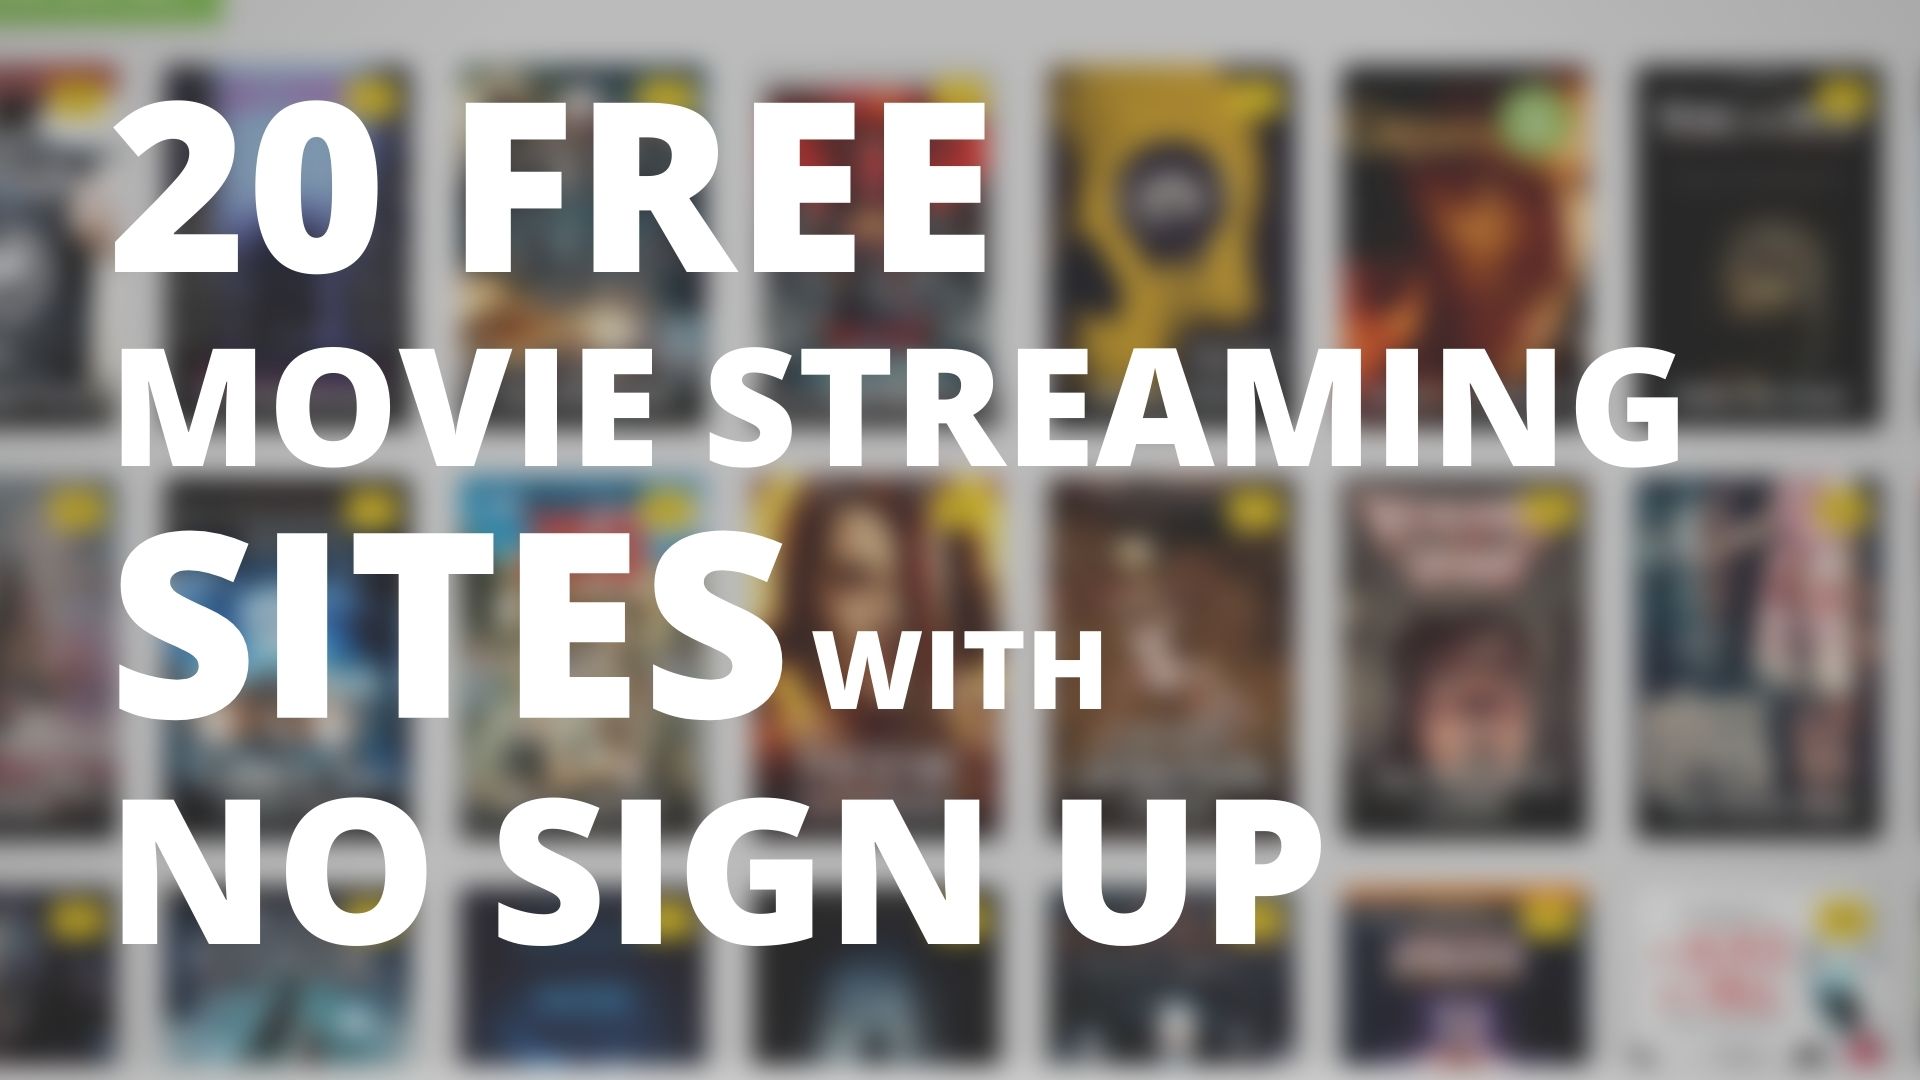 free movie streaming sites with no signup